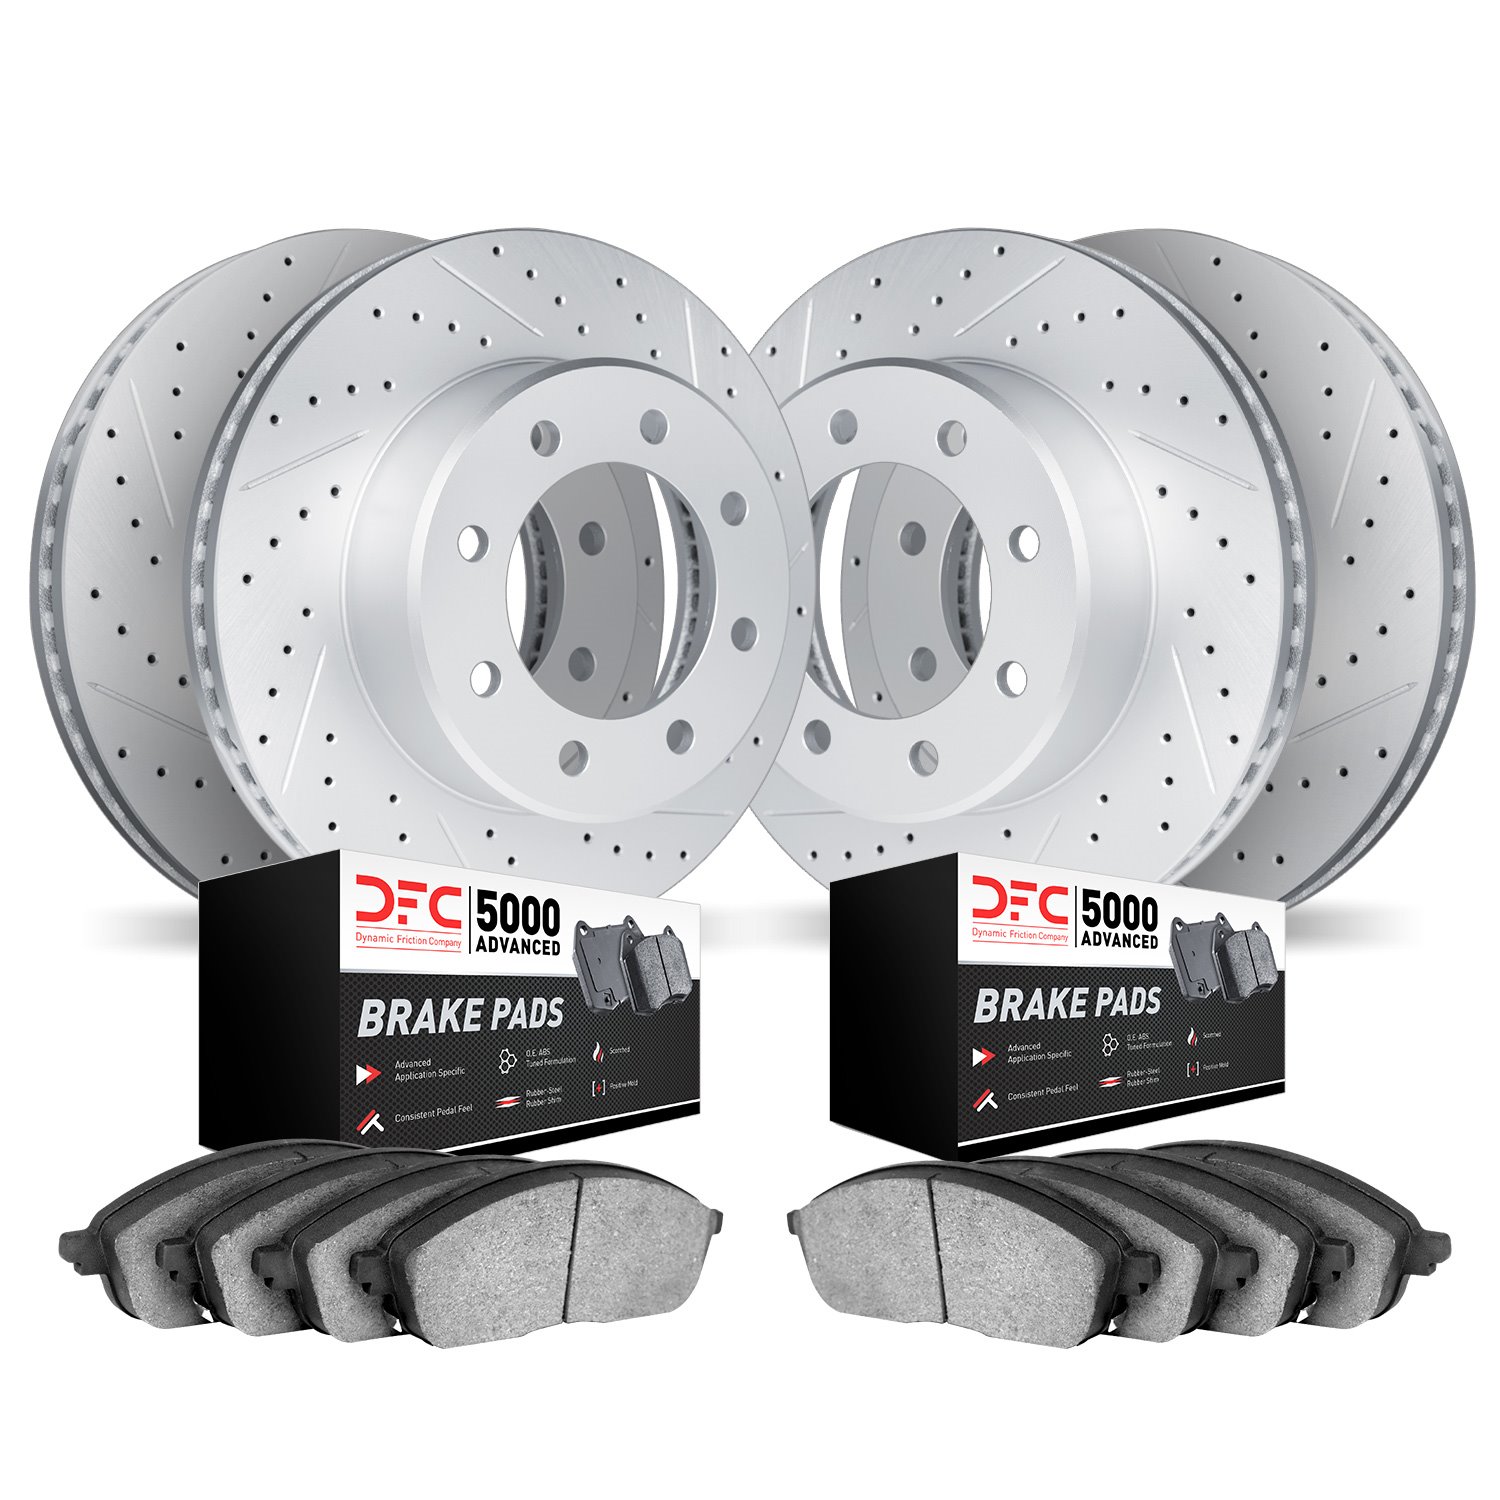 2504-54282 Geoperformance Drilled/Slotted Rotors w/5000 Advanced Brake Pads Kit, 2010-2012 Ford/Lincoln/Mercury/Mazda, Position: